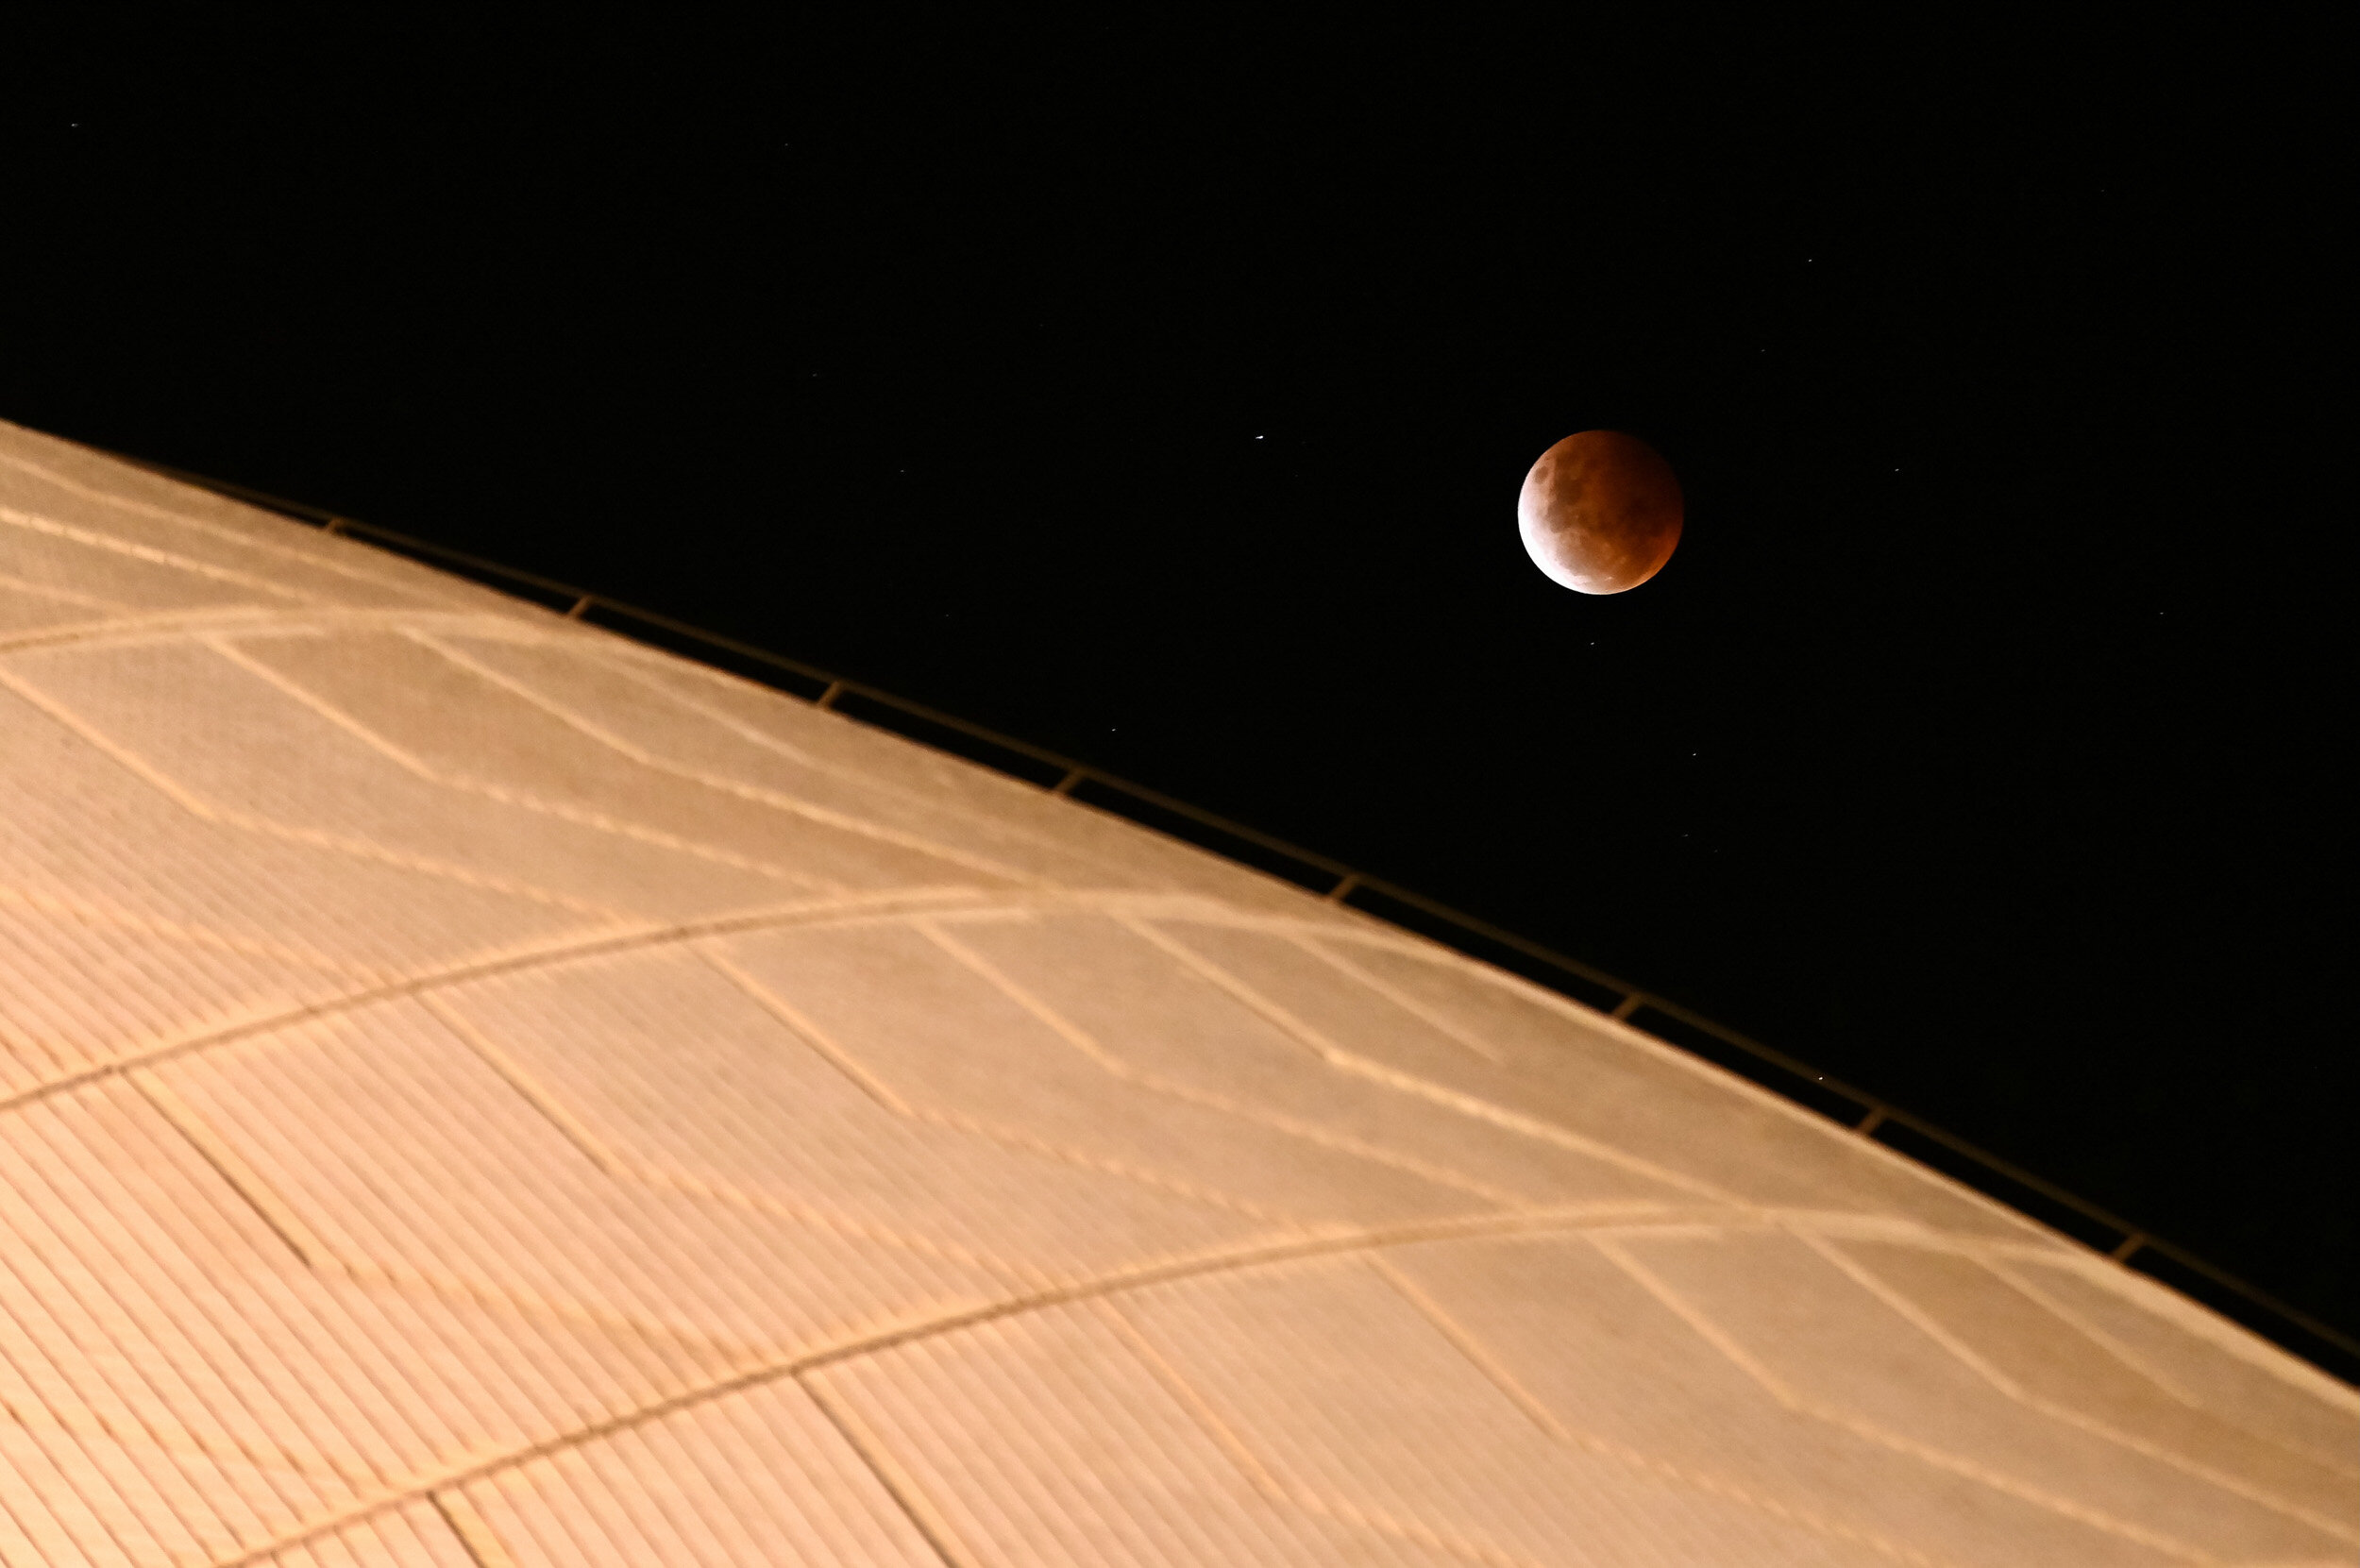  SYDNEY, AUSTRALIA - May 26: The full moon, known as a ‘super blood moon’, rises above the sails of the Sydney Opera House during its total lunar eclipse phase, in Sydney, Australia, on May 26, 2021.The full moon on Wednesday will be the year's bigge